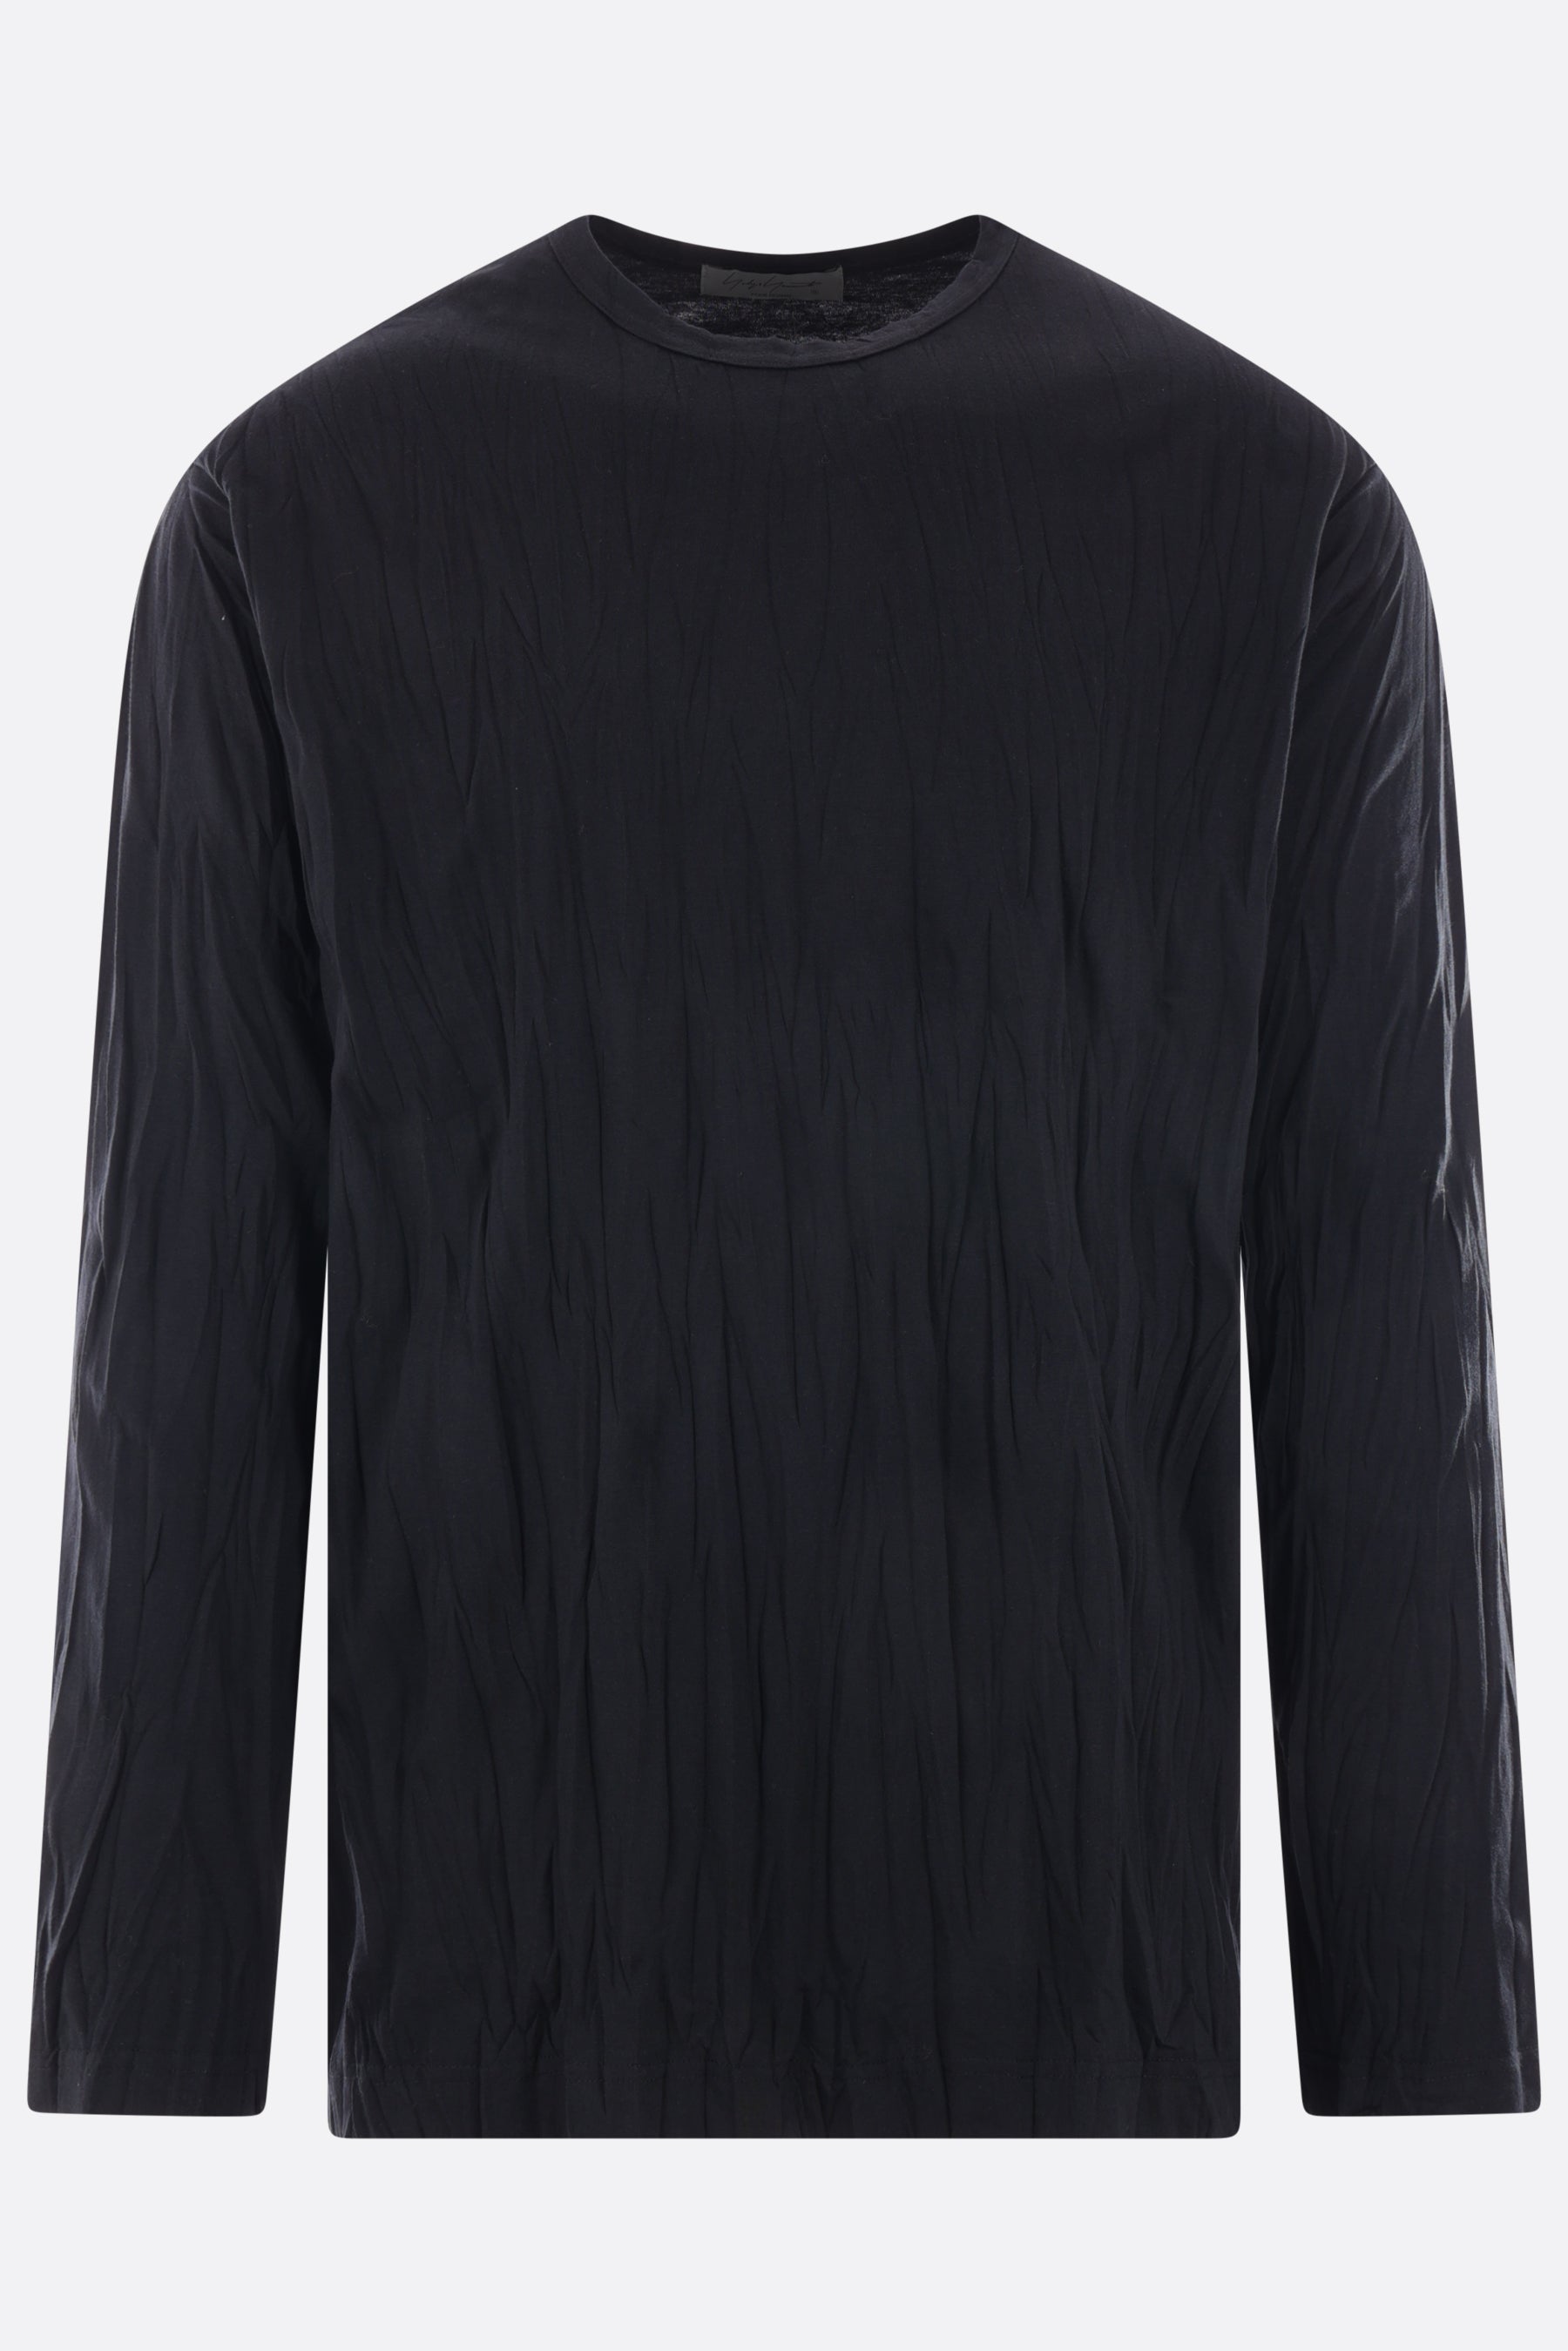 jersey long-sleeved t-shirt with vertical pressed creases